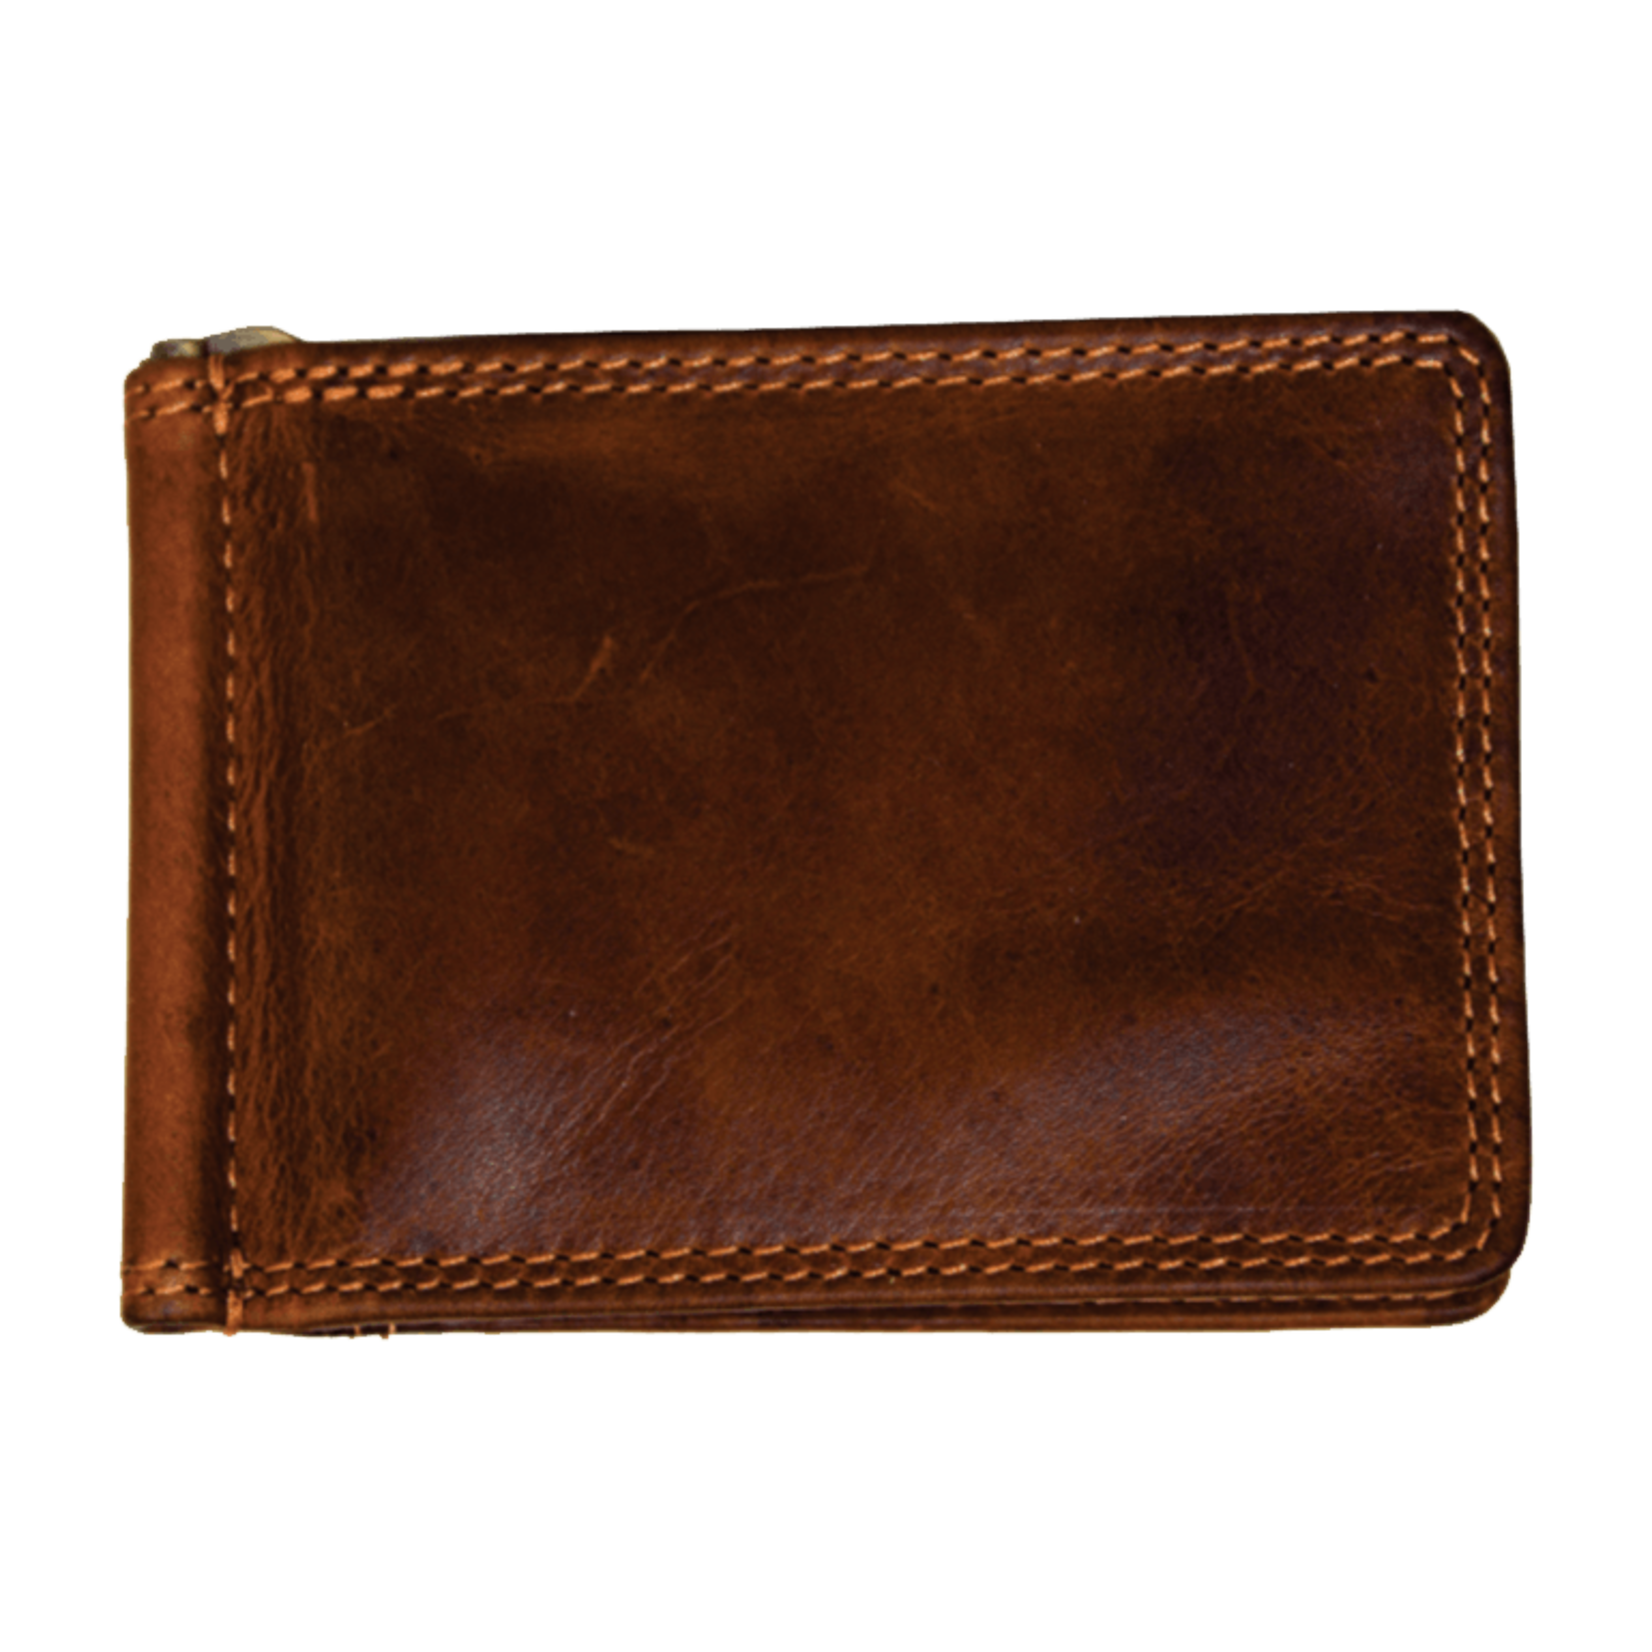 Rugged Earth Money Clip Wallet